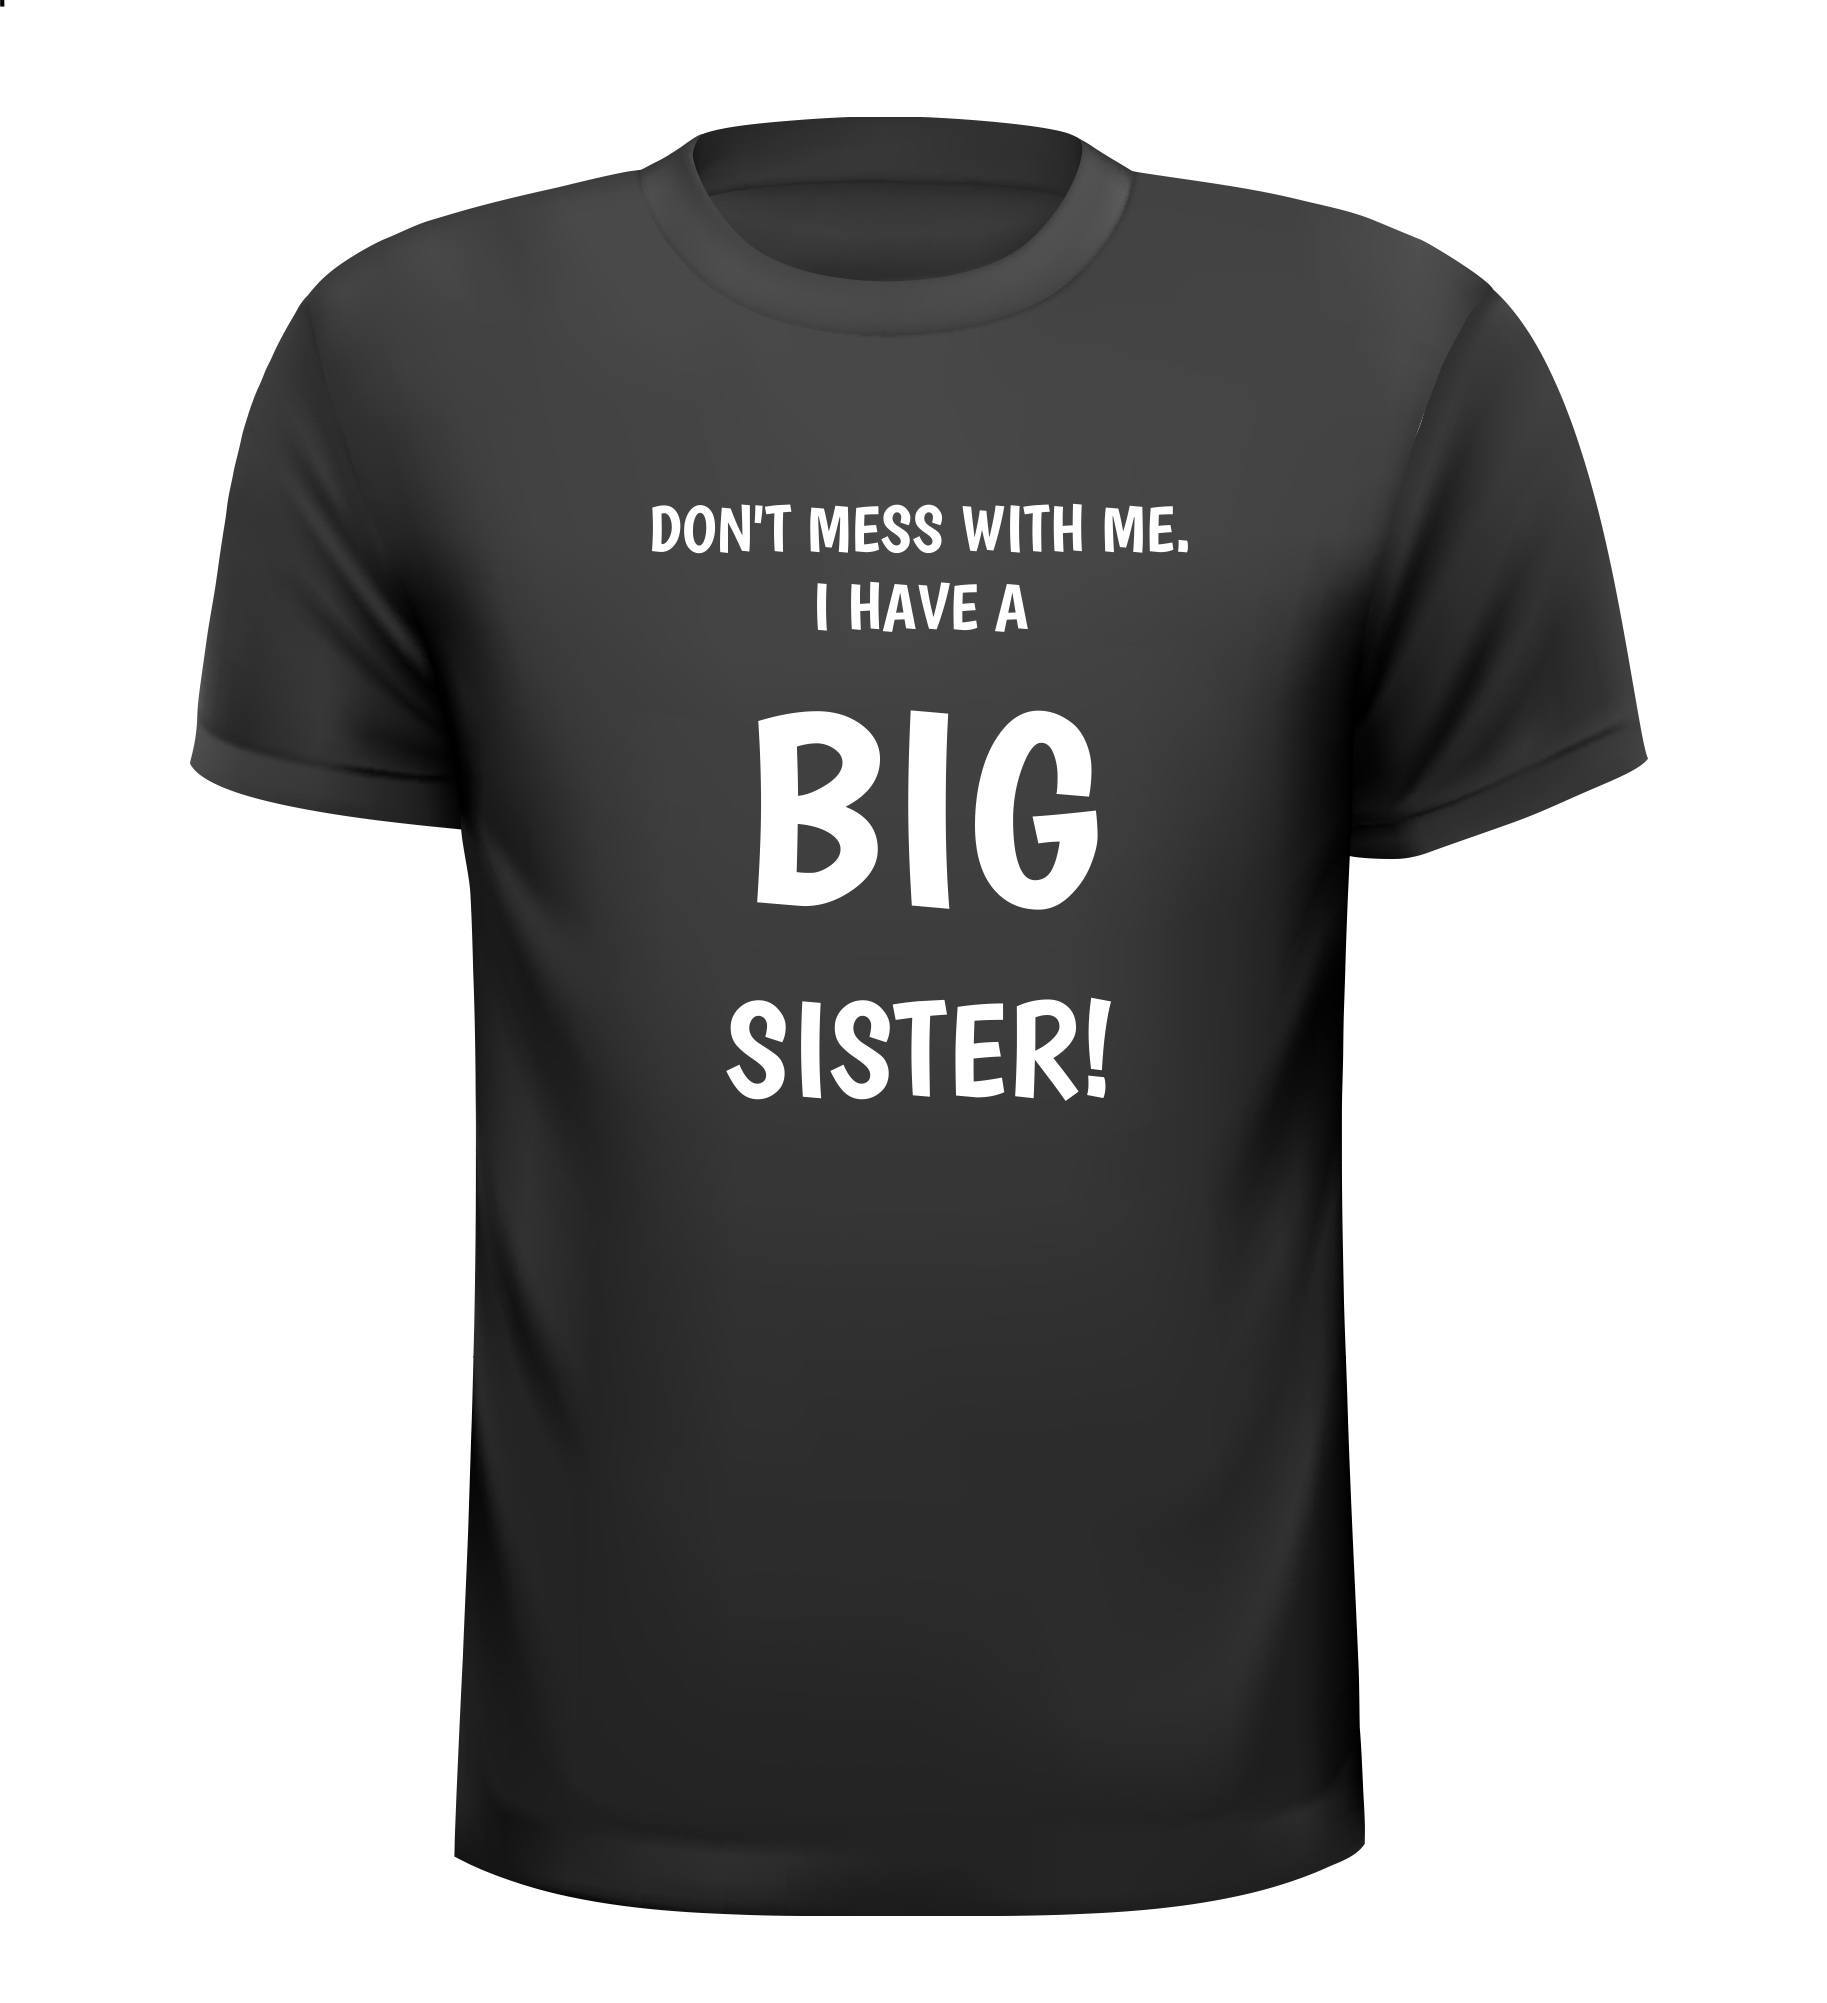 T-shirt don't mess with me i have a big sister grote zus